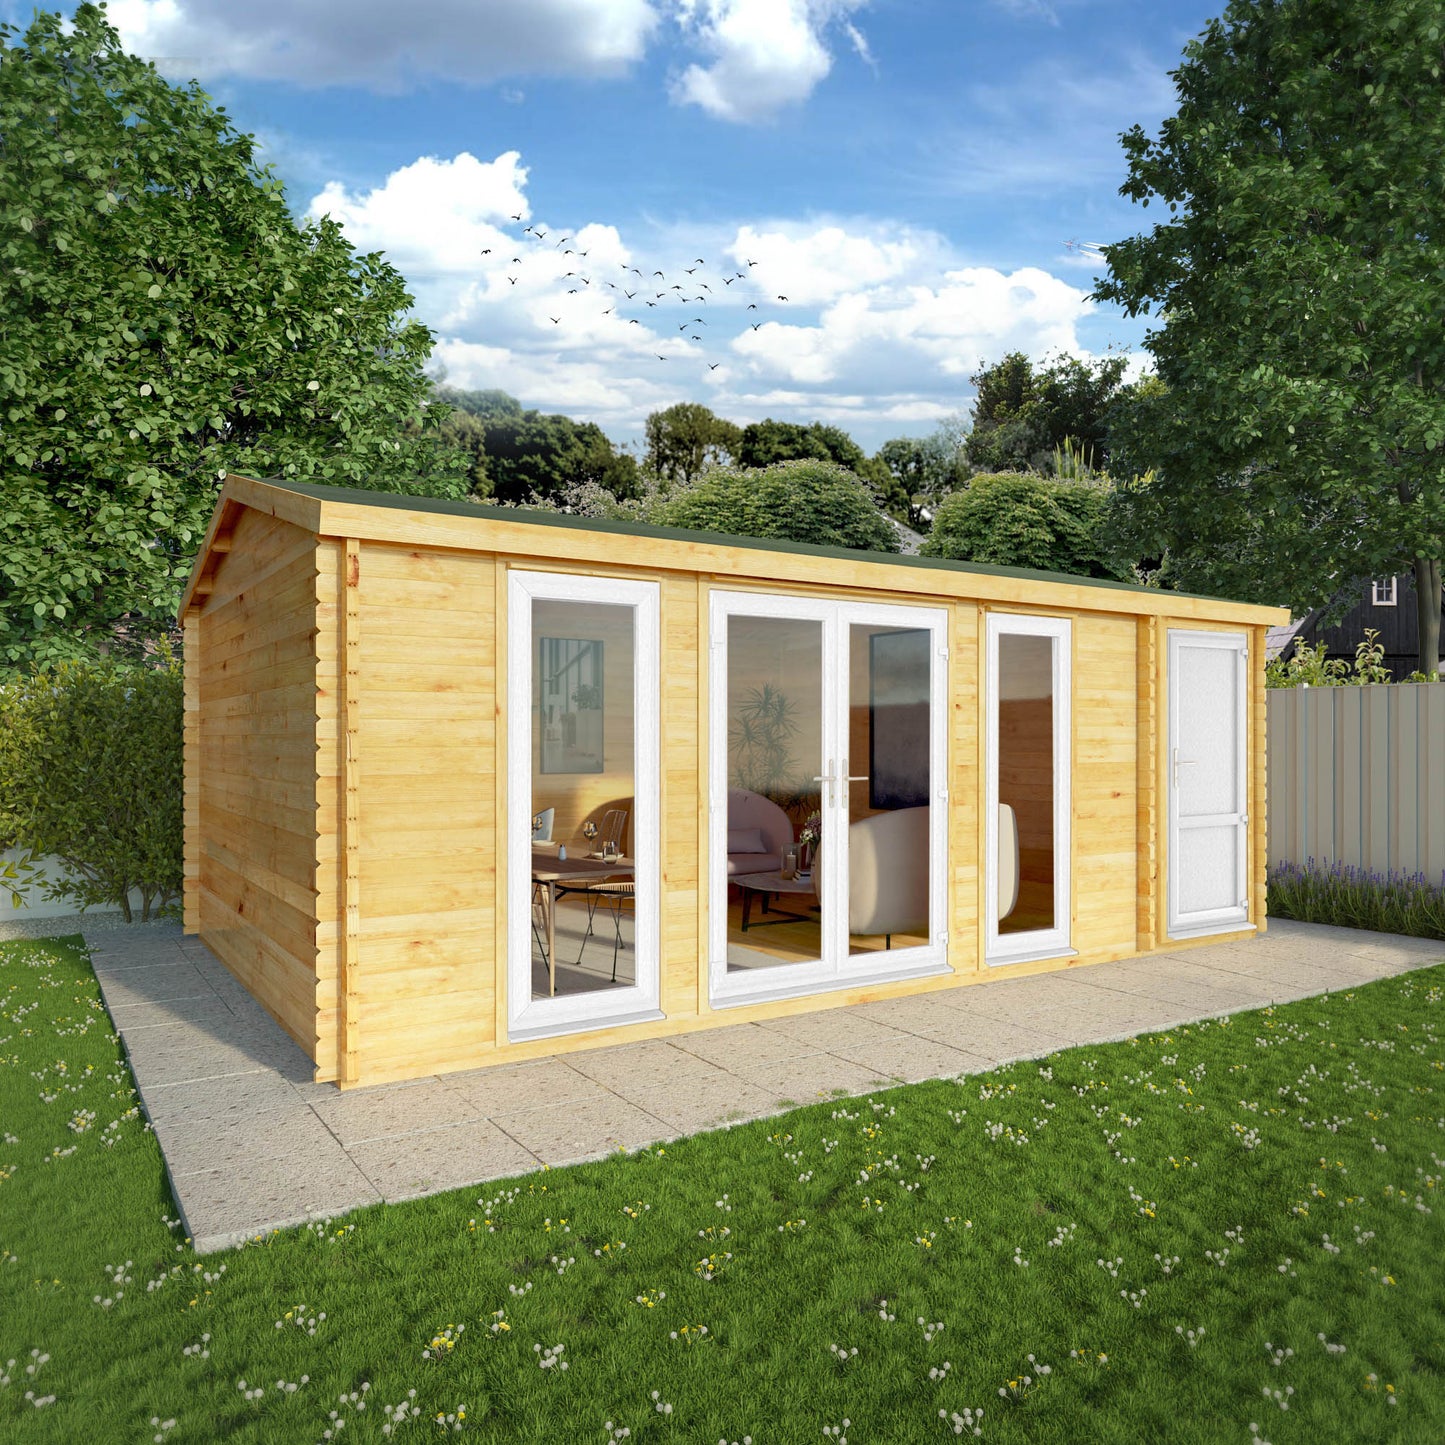 The 6.1m x 4m Dove Log Cabin with Side Shed and White UPVC